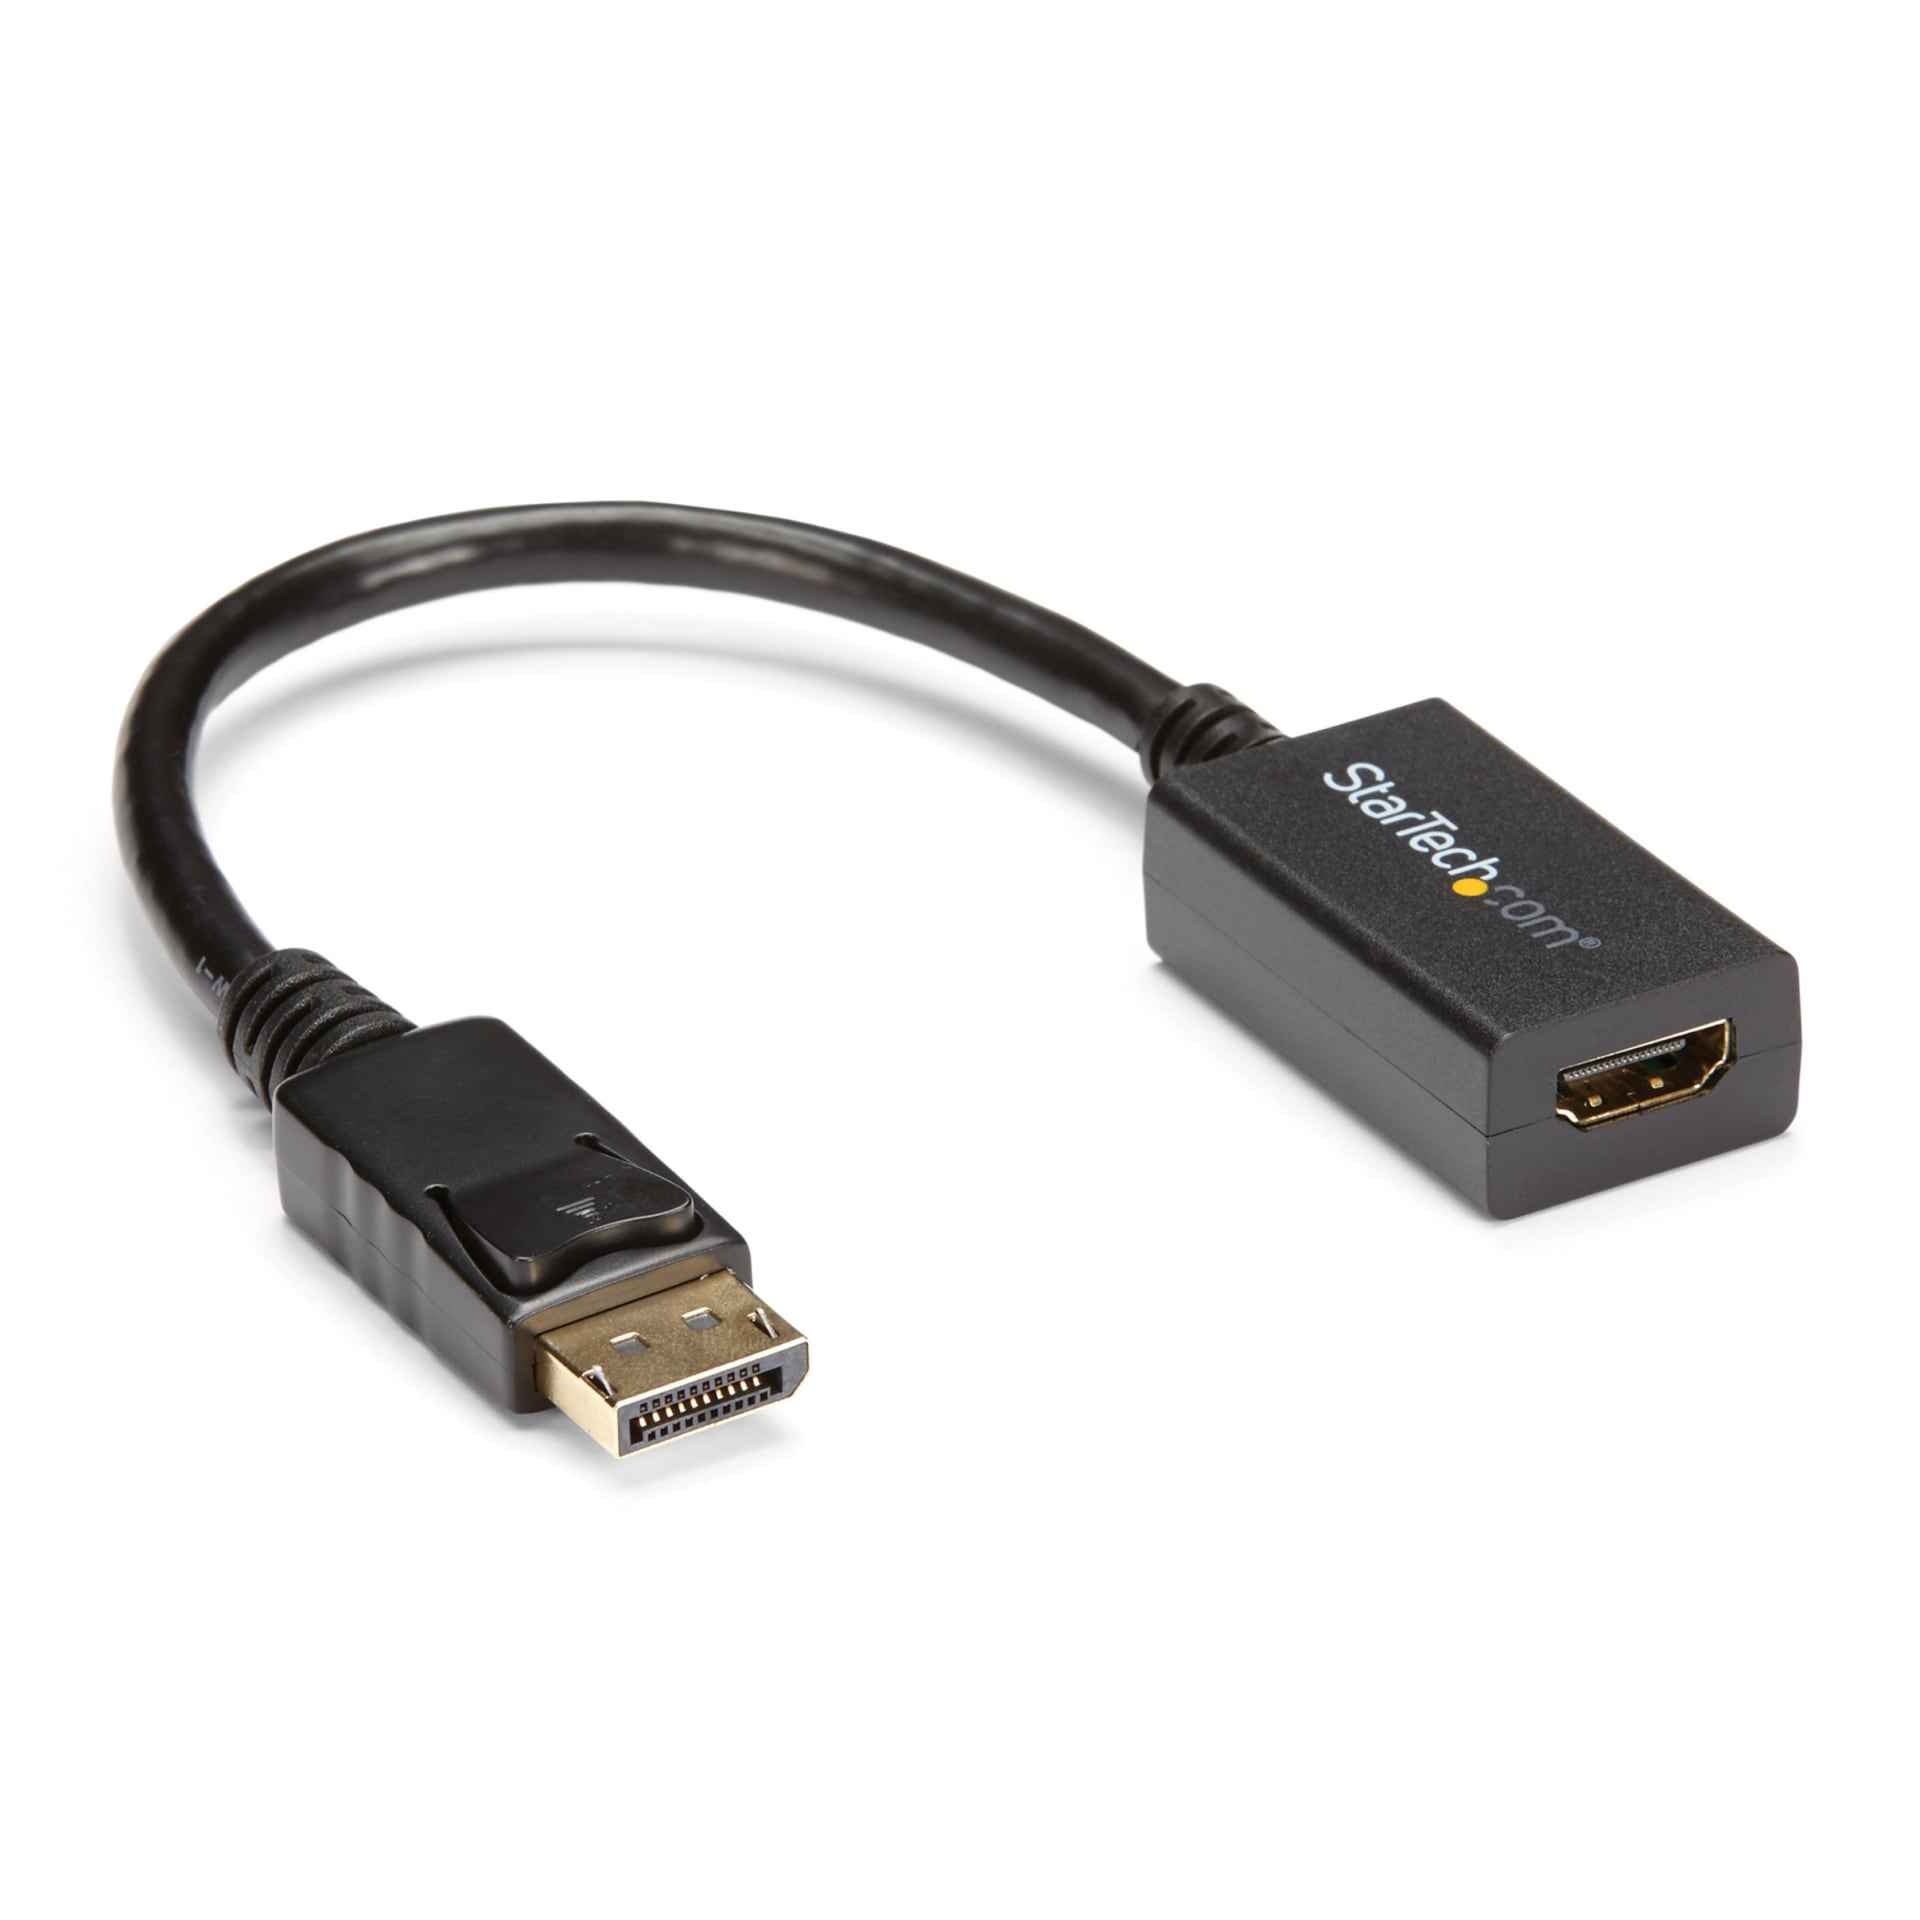 StarTech.com DisplayPort to HDMI Adapter - 1080p DP to HDMI Converter - Passive Video Adapter Dongle - DP2HDMI2 Cables & - CDW.com